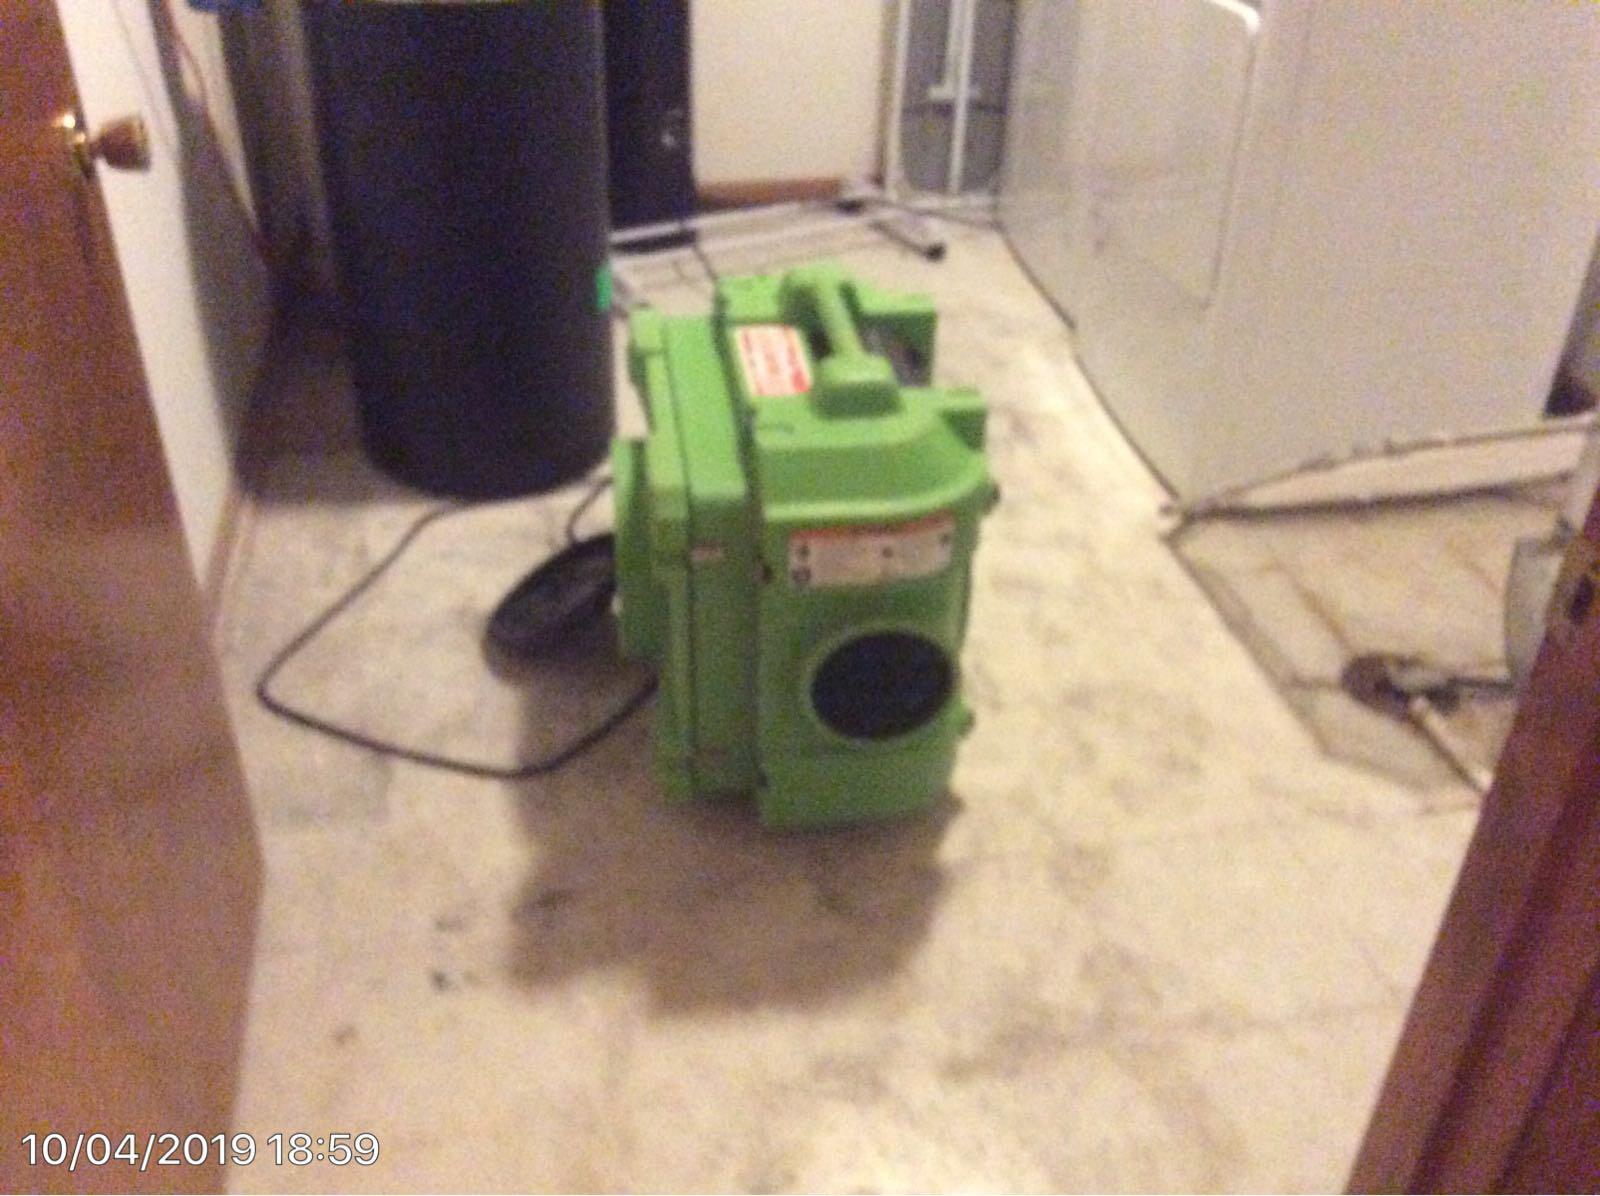 Call SERVPRO of Leawood/Overland Park if you experience flooding or water damage.